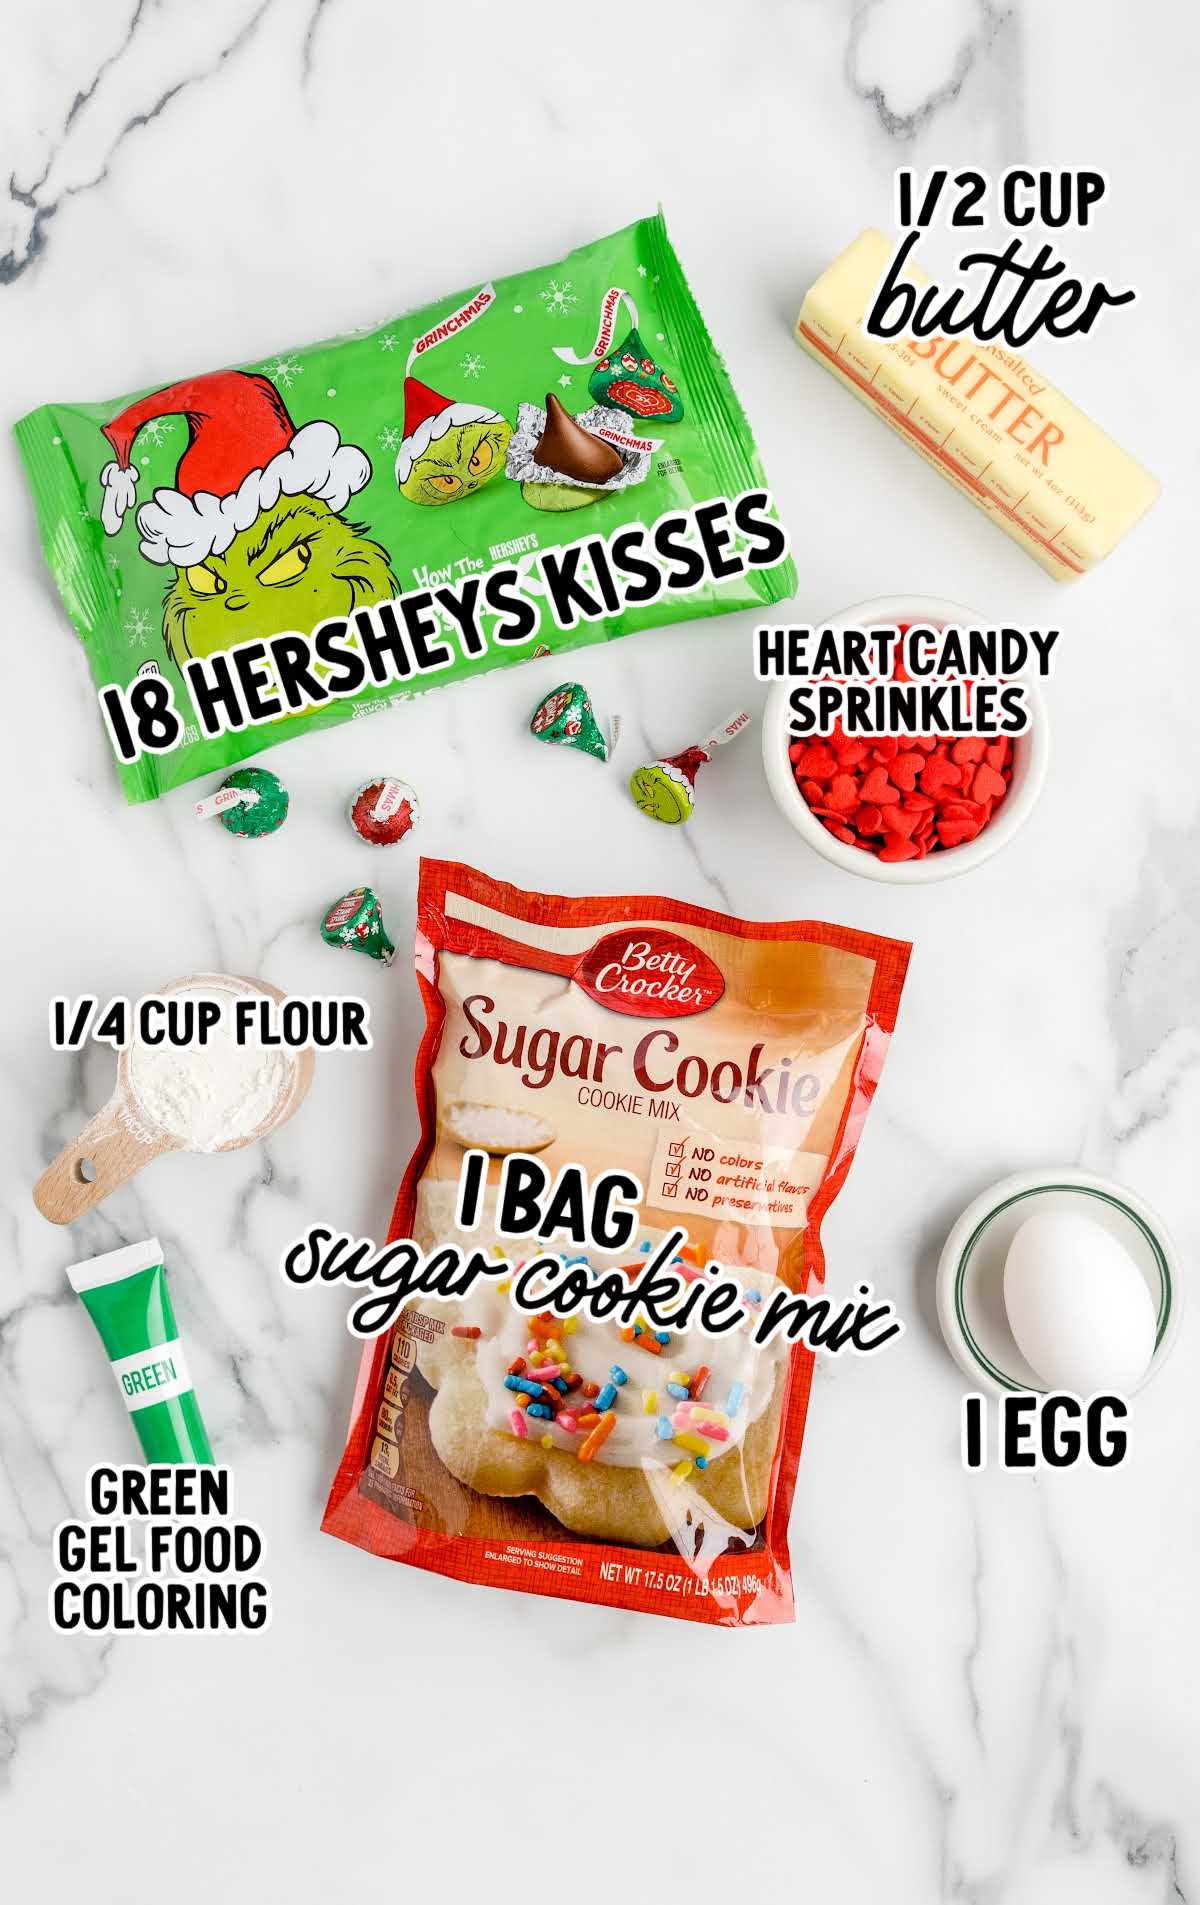 Grinch Stuffed Cookies raw ingredients that are labeled